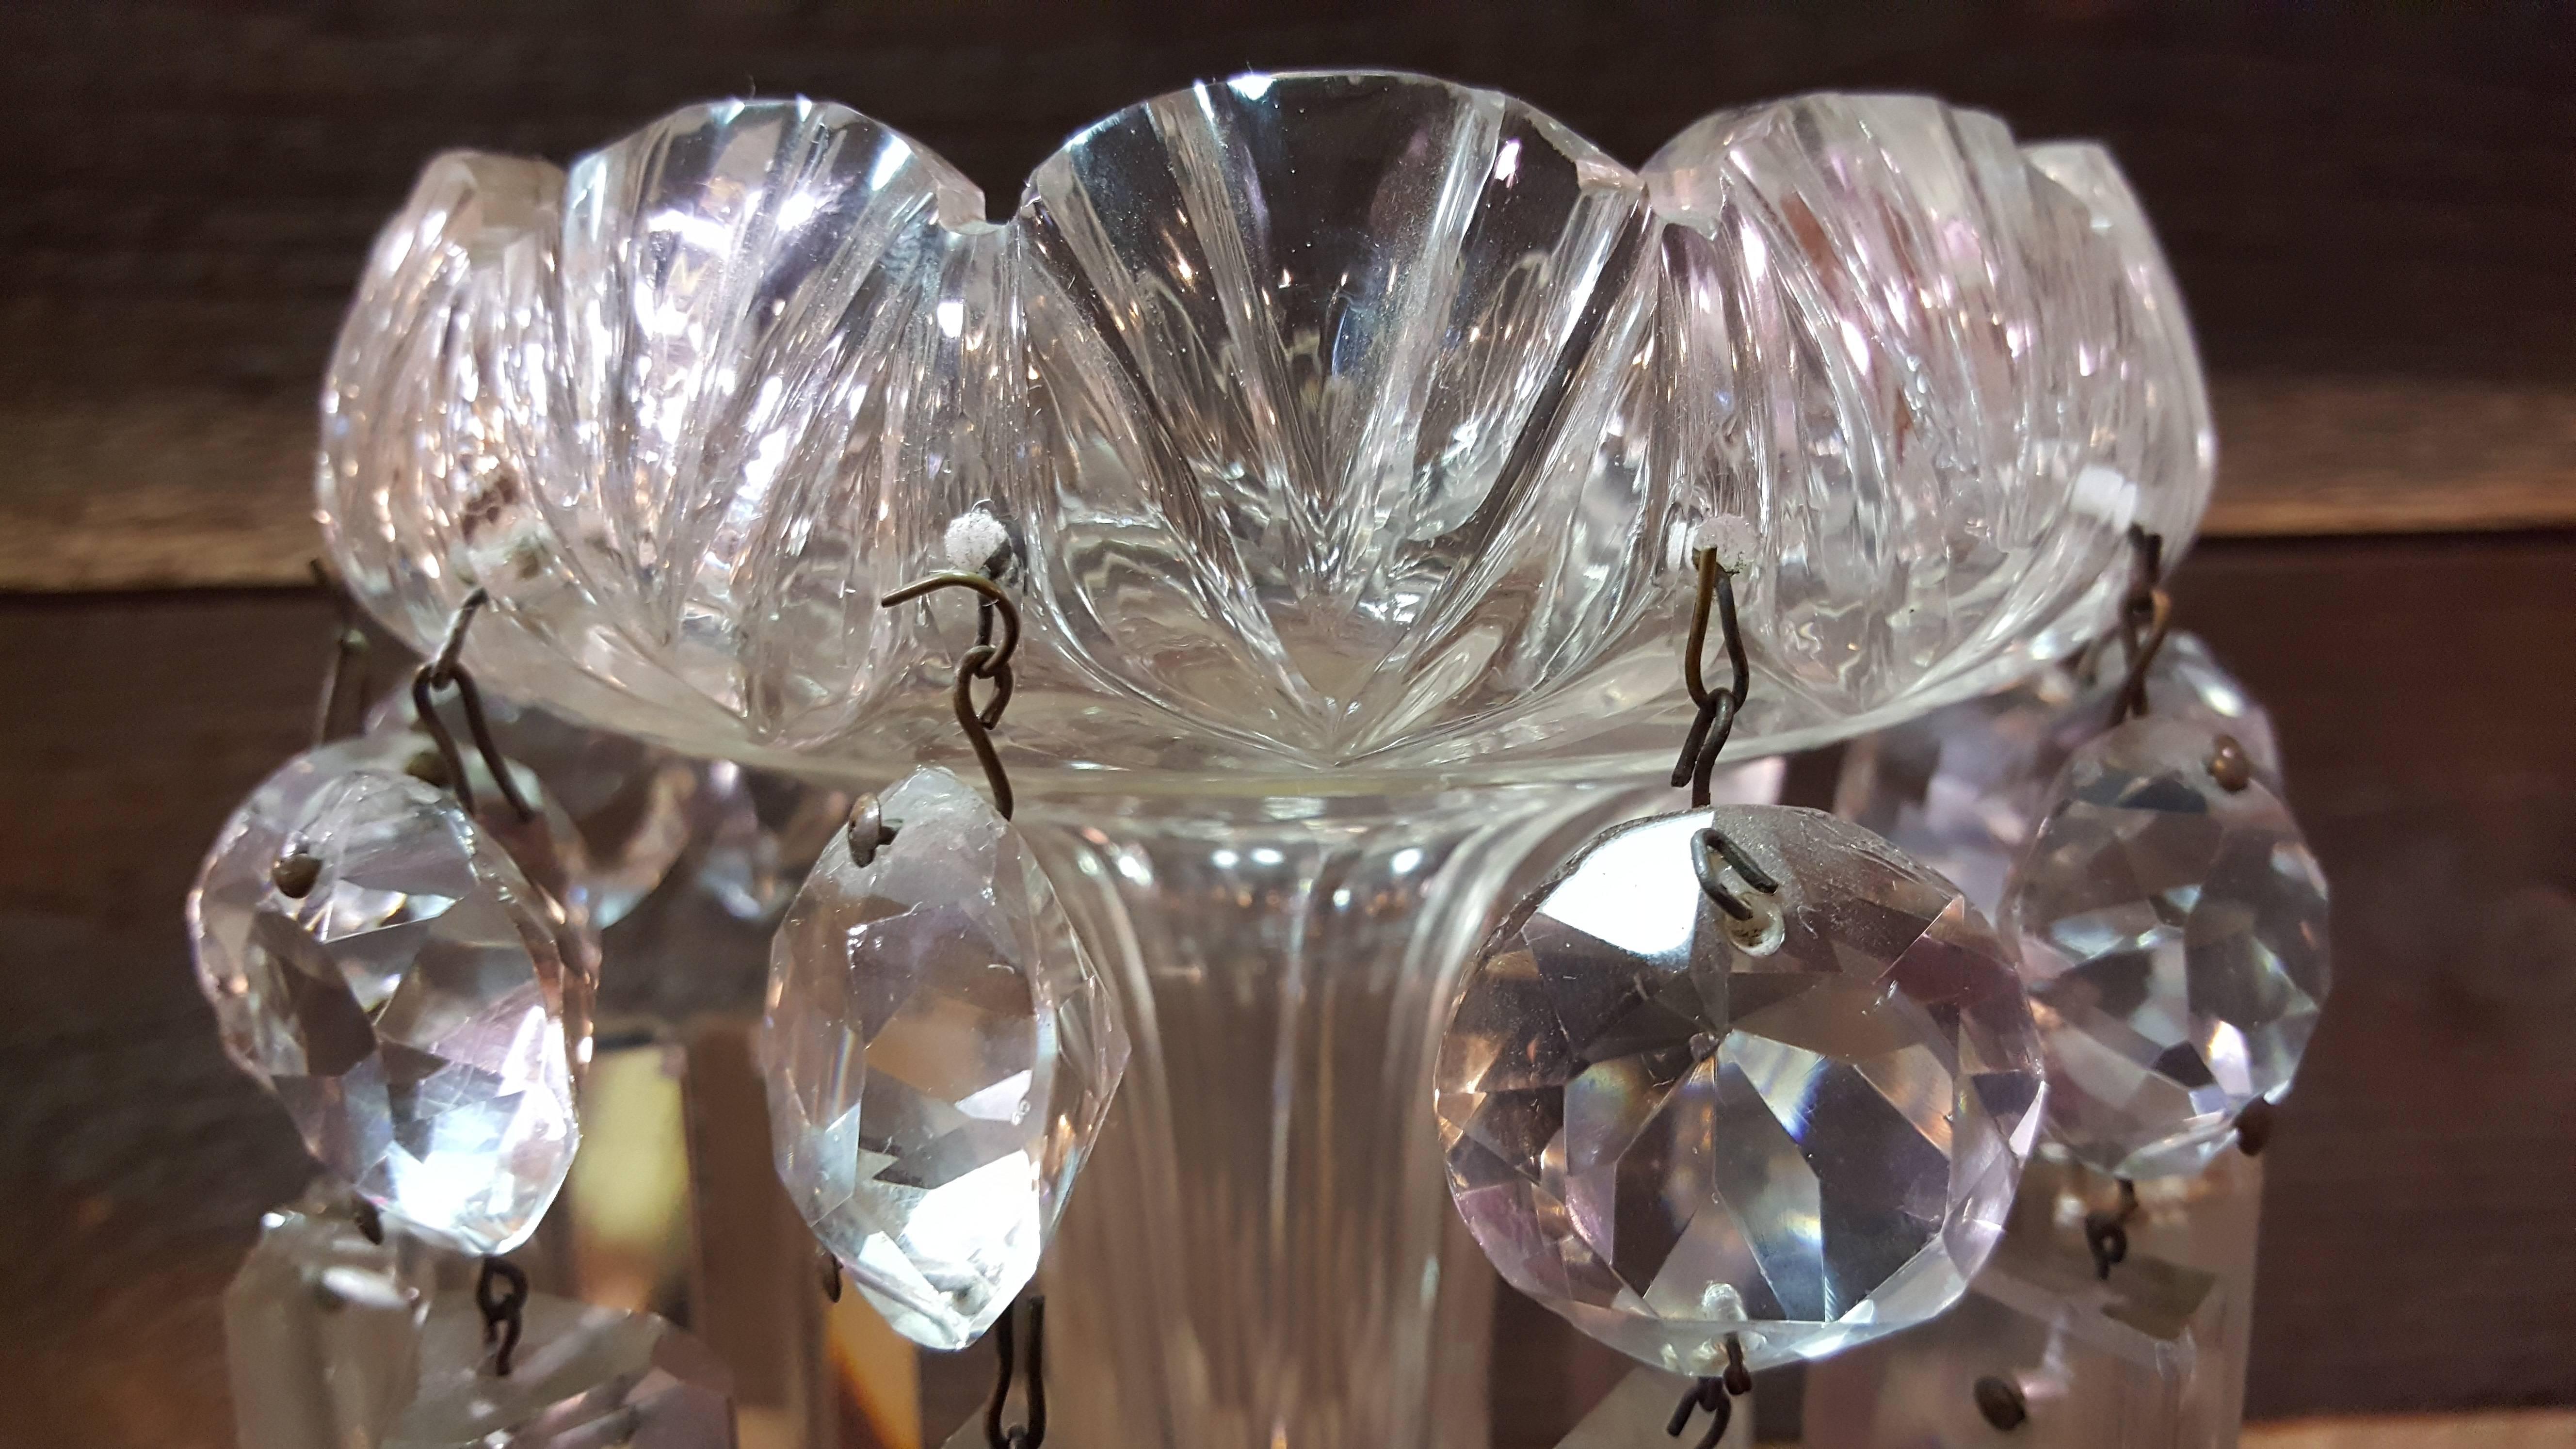 A pair of antique crystal lusters with clear cut crystal prisms and stems, circa 1880s.